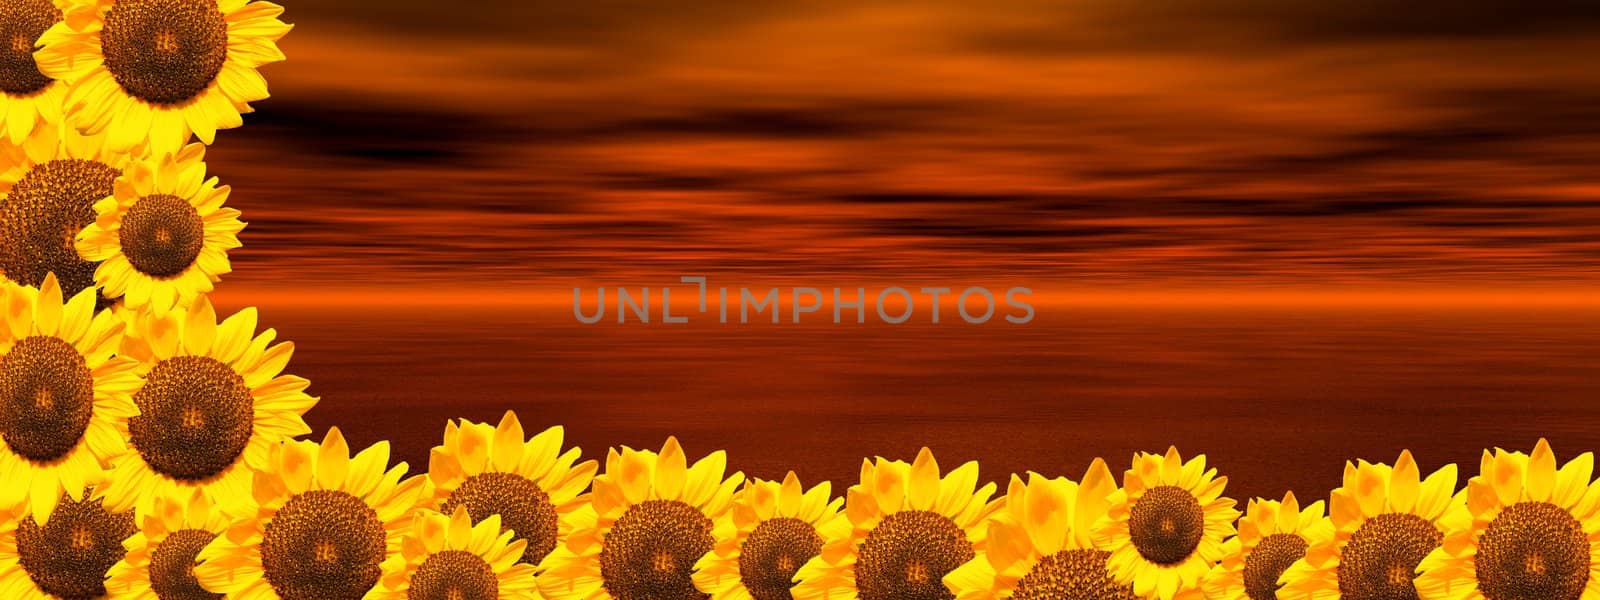 Red ocean and sunflowers by Elenaphotos21